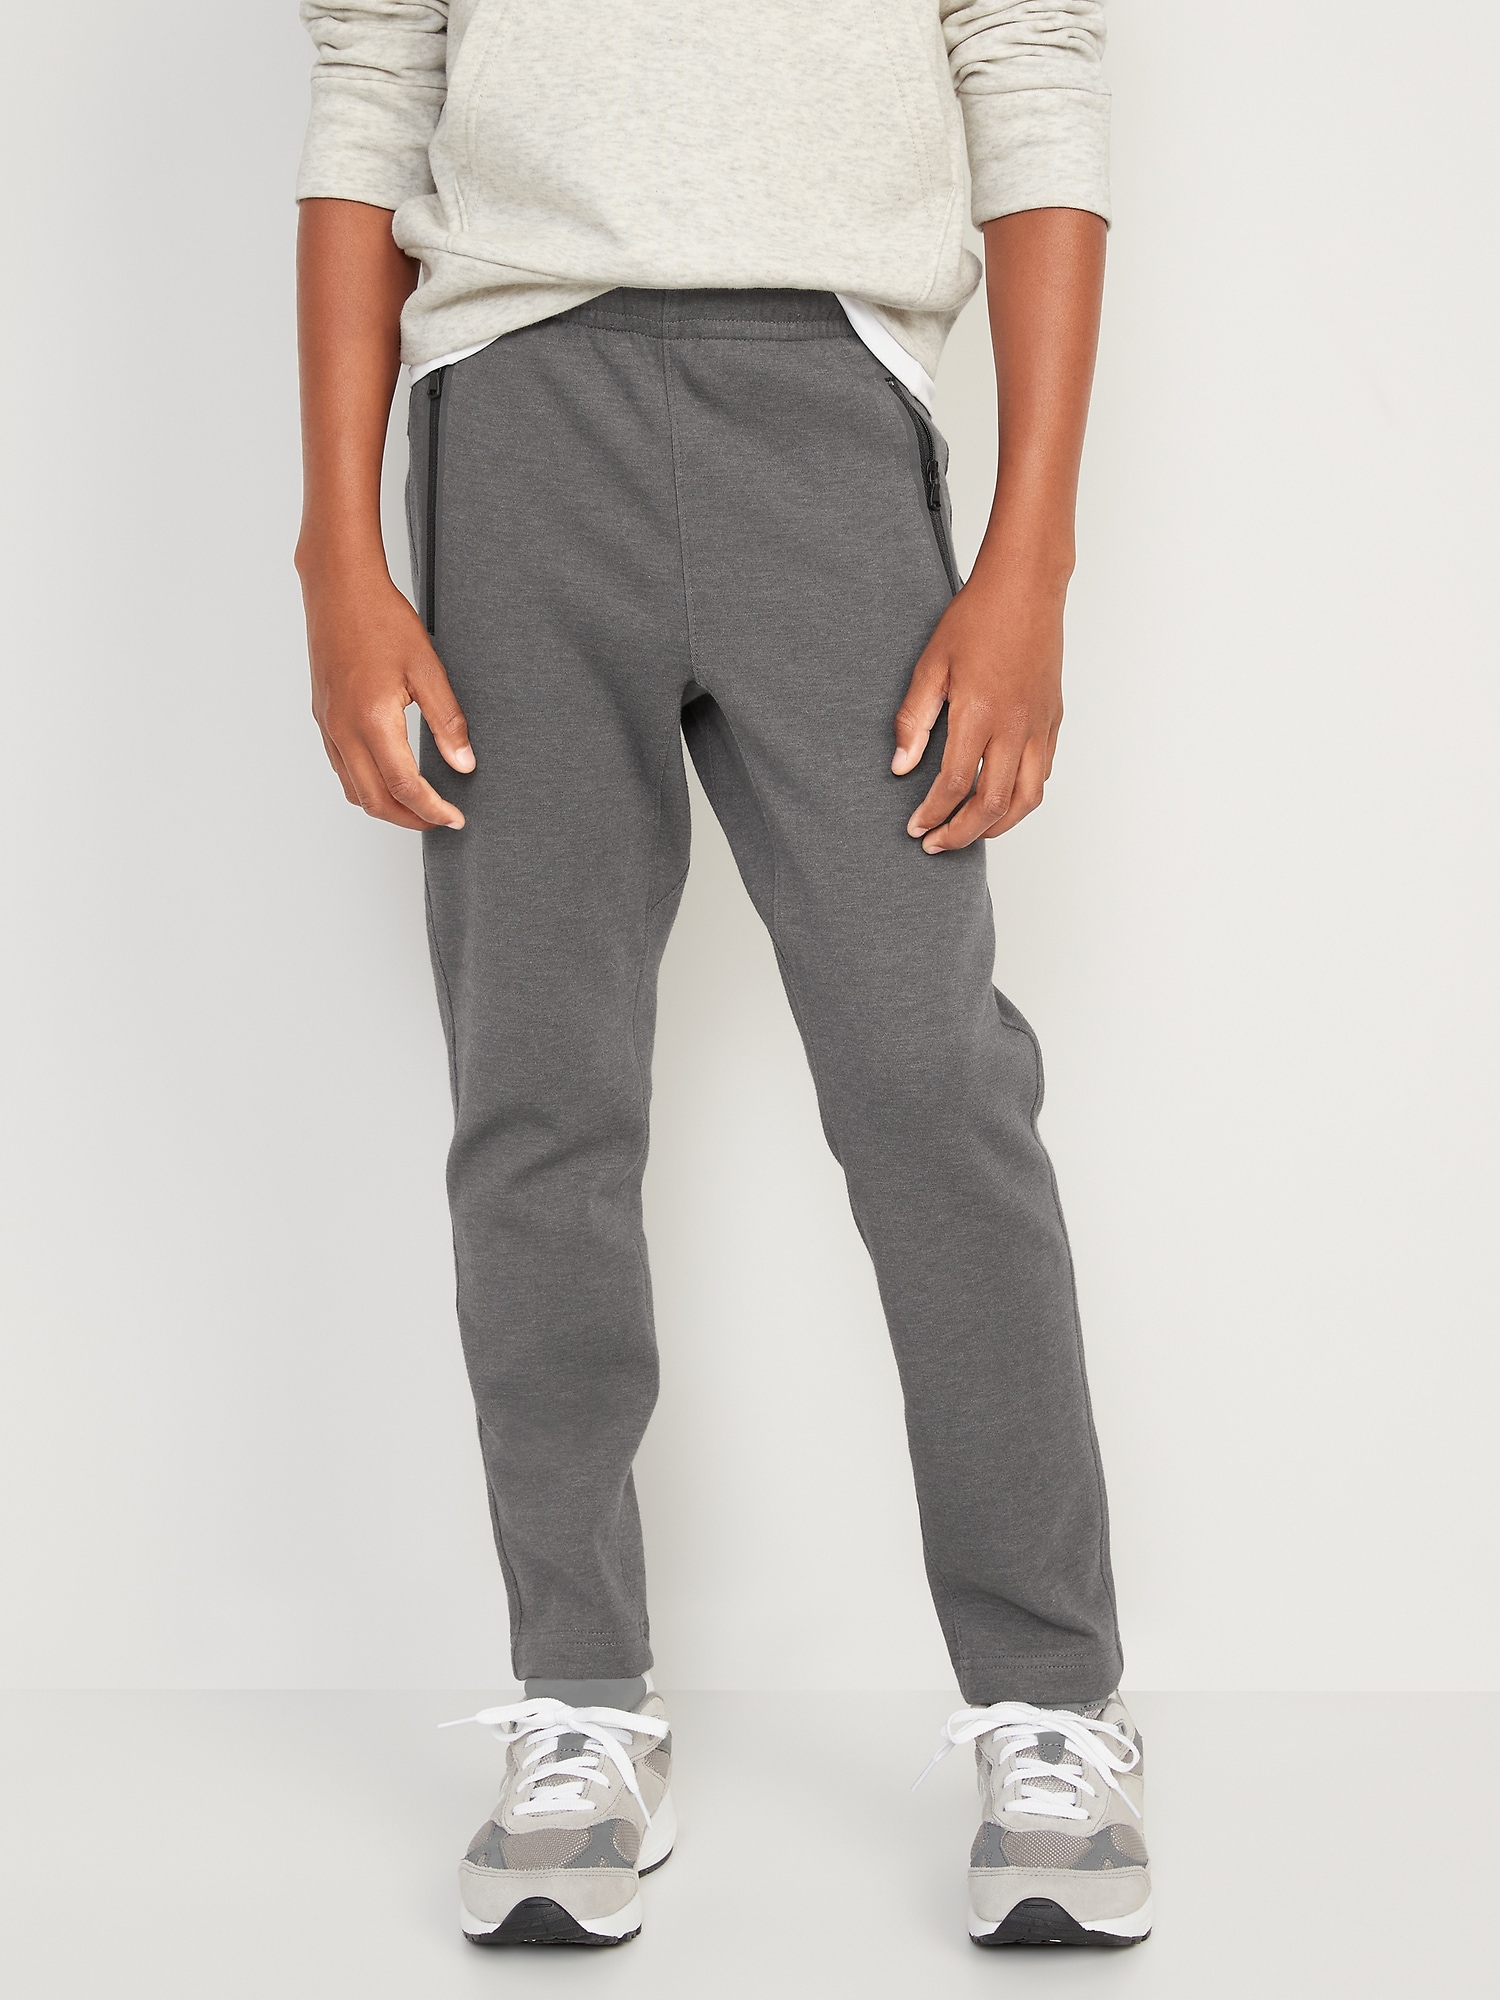 Old Navy Dynamic Fleece Tapered Sweatpants for Boys gray. 1